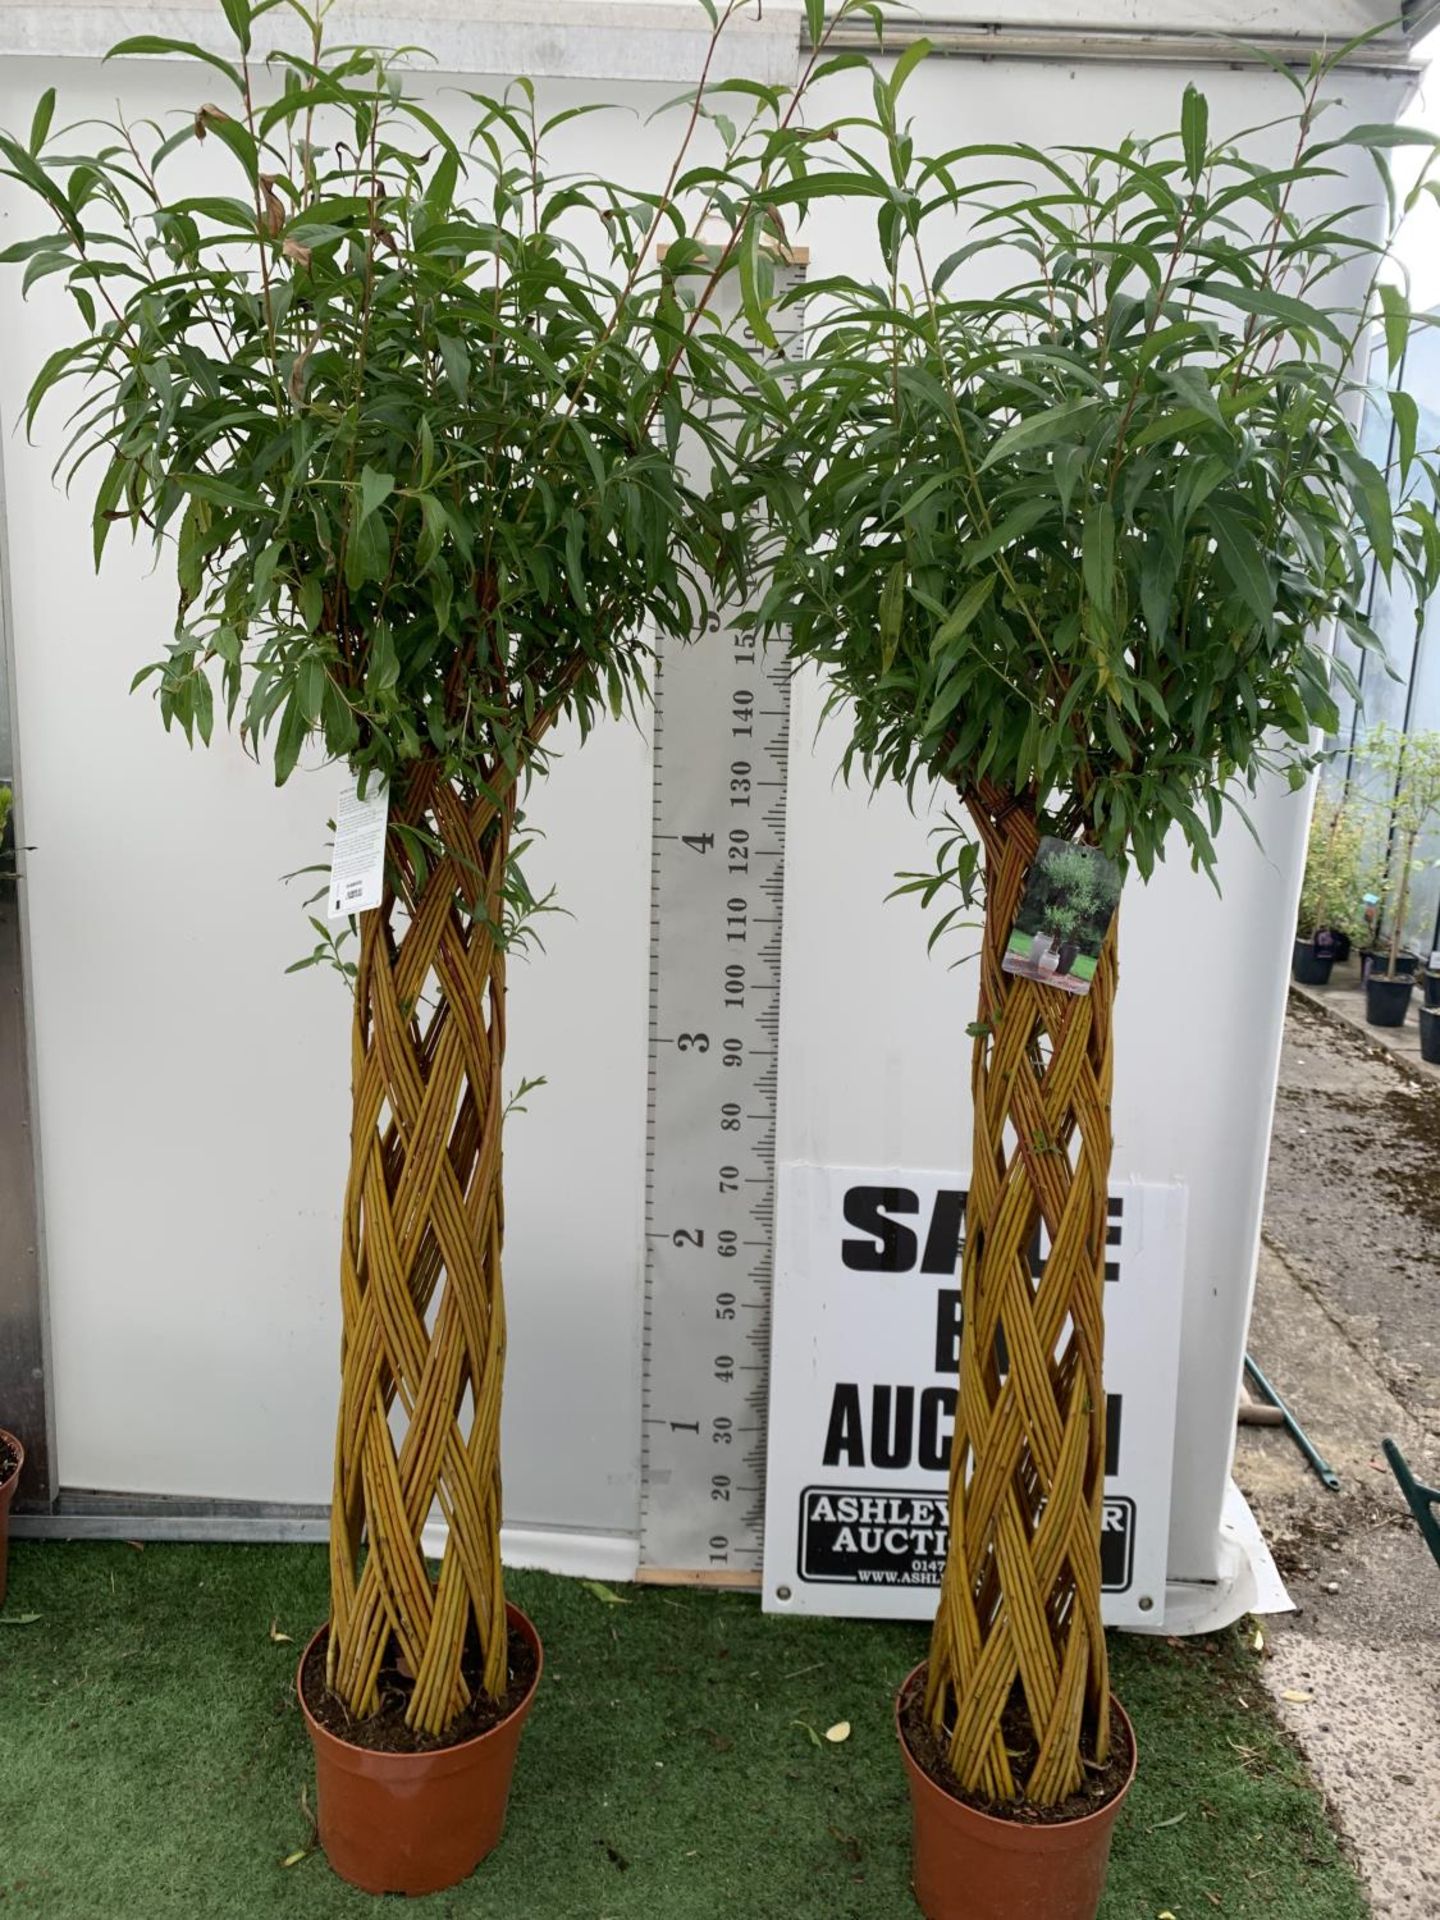 TWO SALIX LIVING WILLOW TREES IN 7.5 LTR POTS OVER 2 METRES IN HEIGHT TO BE SOLD FOR THE TWO PLUS